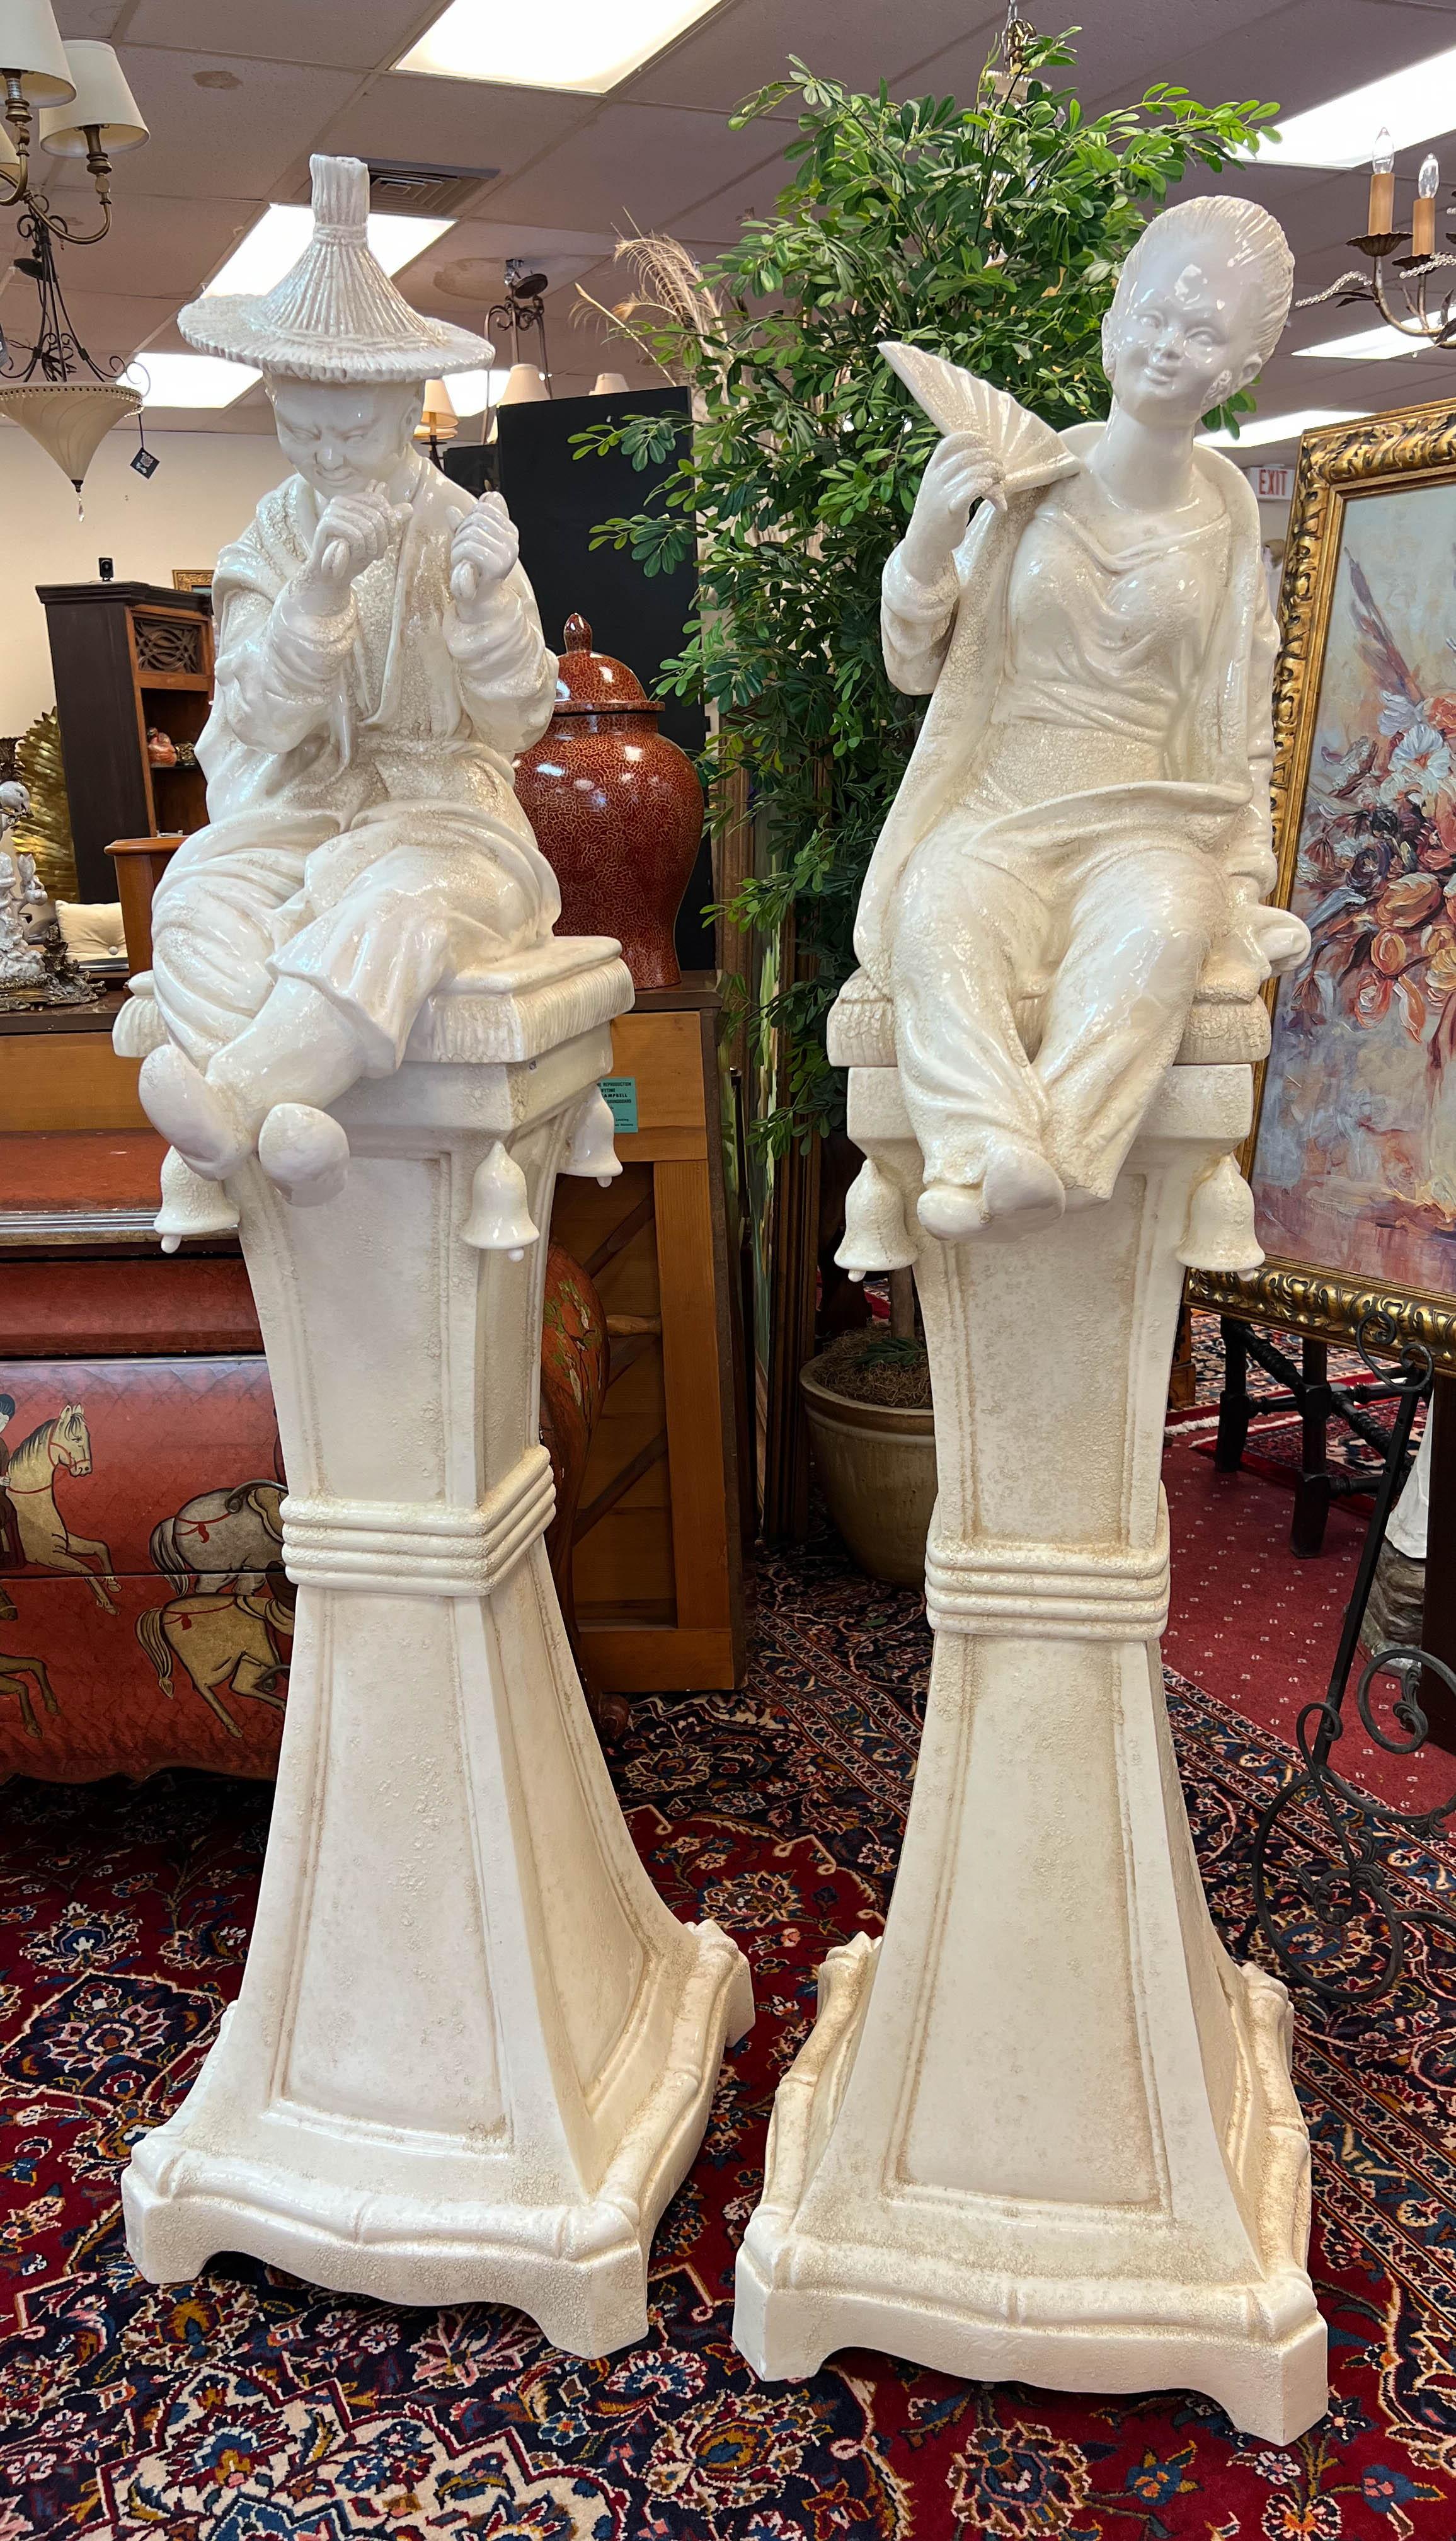 Made in Italy, this pair of Chinoiserie style Blanc de Chine figures stand 70